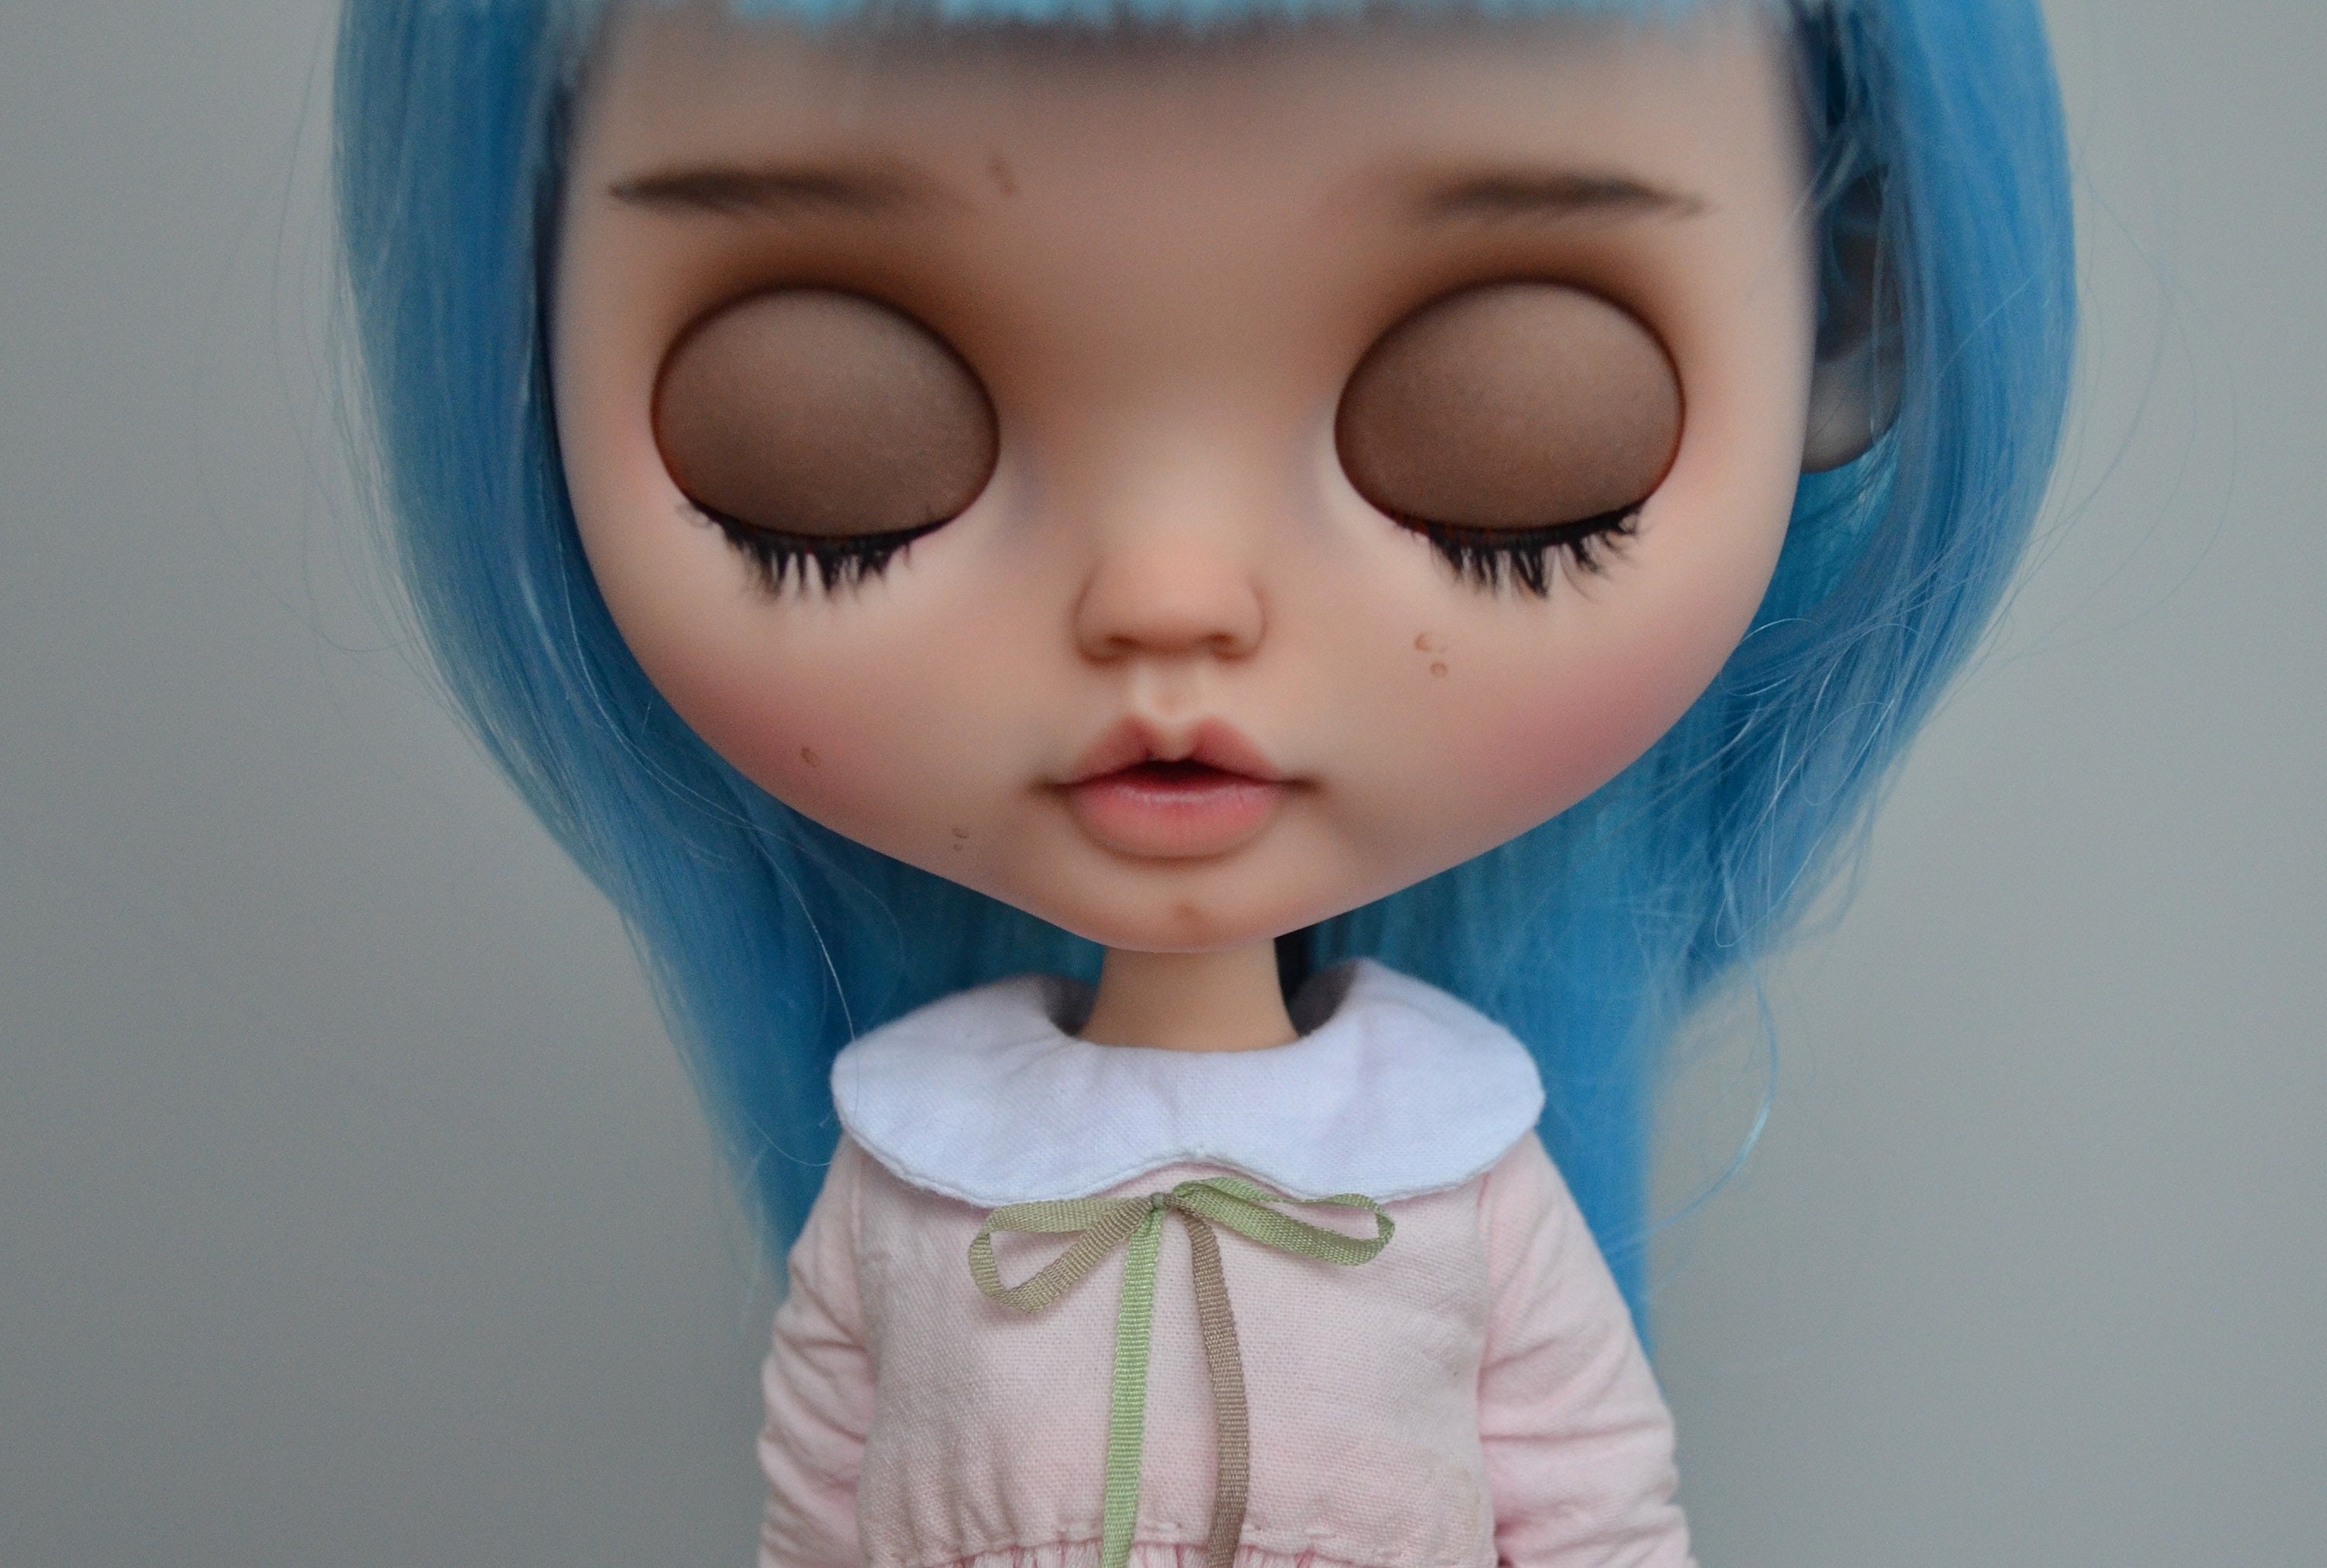 2. "Sapphire" 18 inch doll with blue hair - wide 7